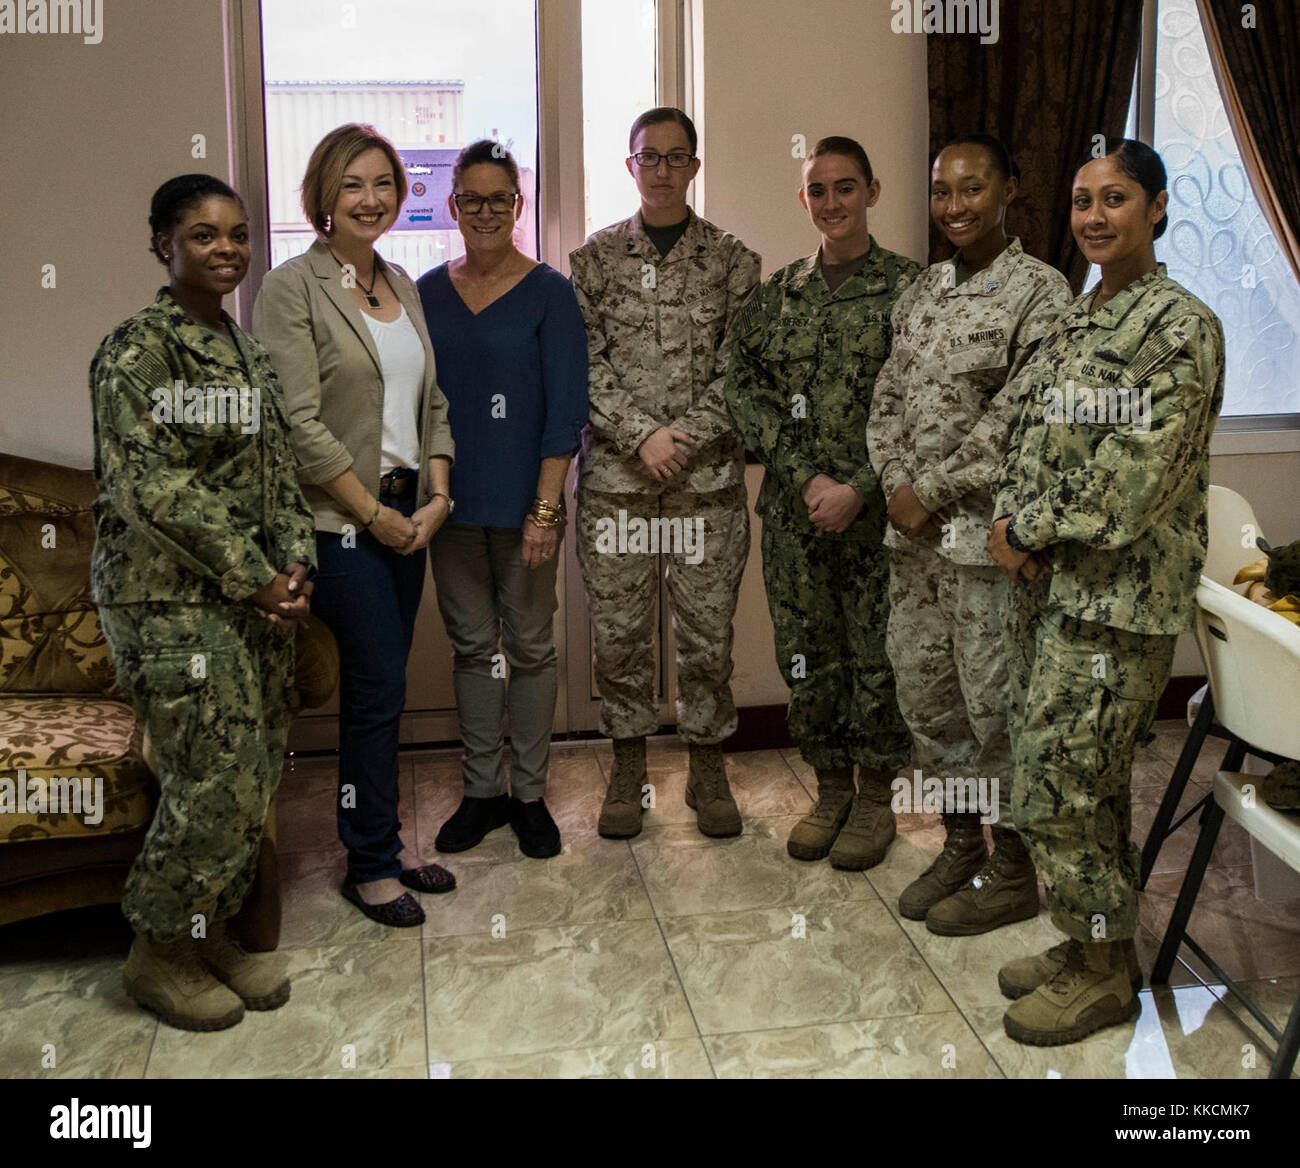 The Secretary of the Navy Richard V. Spencer and his wife, Mrs. Sarah Pauline Finch Spencer, had breakfast with troops and toured Camp Lemonnier’s facilities during a visit to the base, Nov. 24, 2017. While on base, Mrs. Spencer toured the Emergency Medical Facility, enlisted barracks, Fitness Center, Navy Exchange and galley. (U.S. Air National Guard photo by Staff Sgt. Allyson L. Manners) Stock Photo